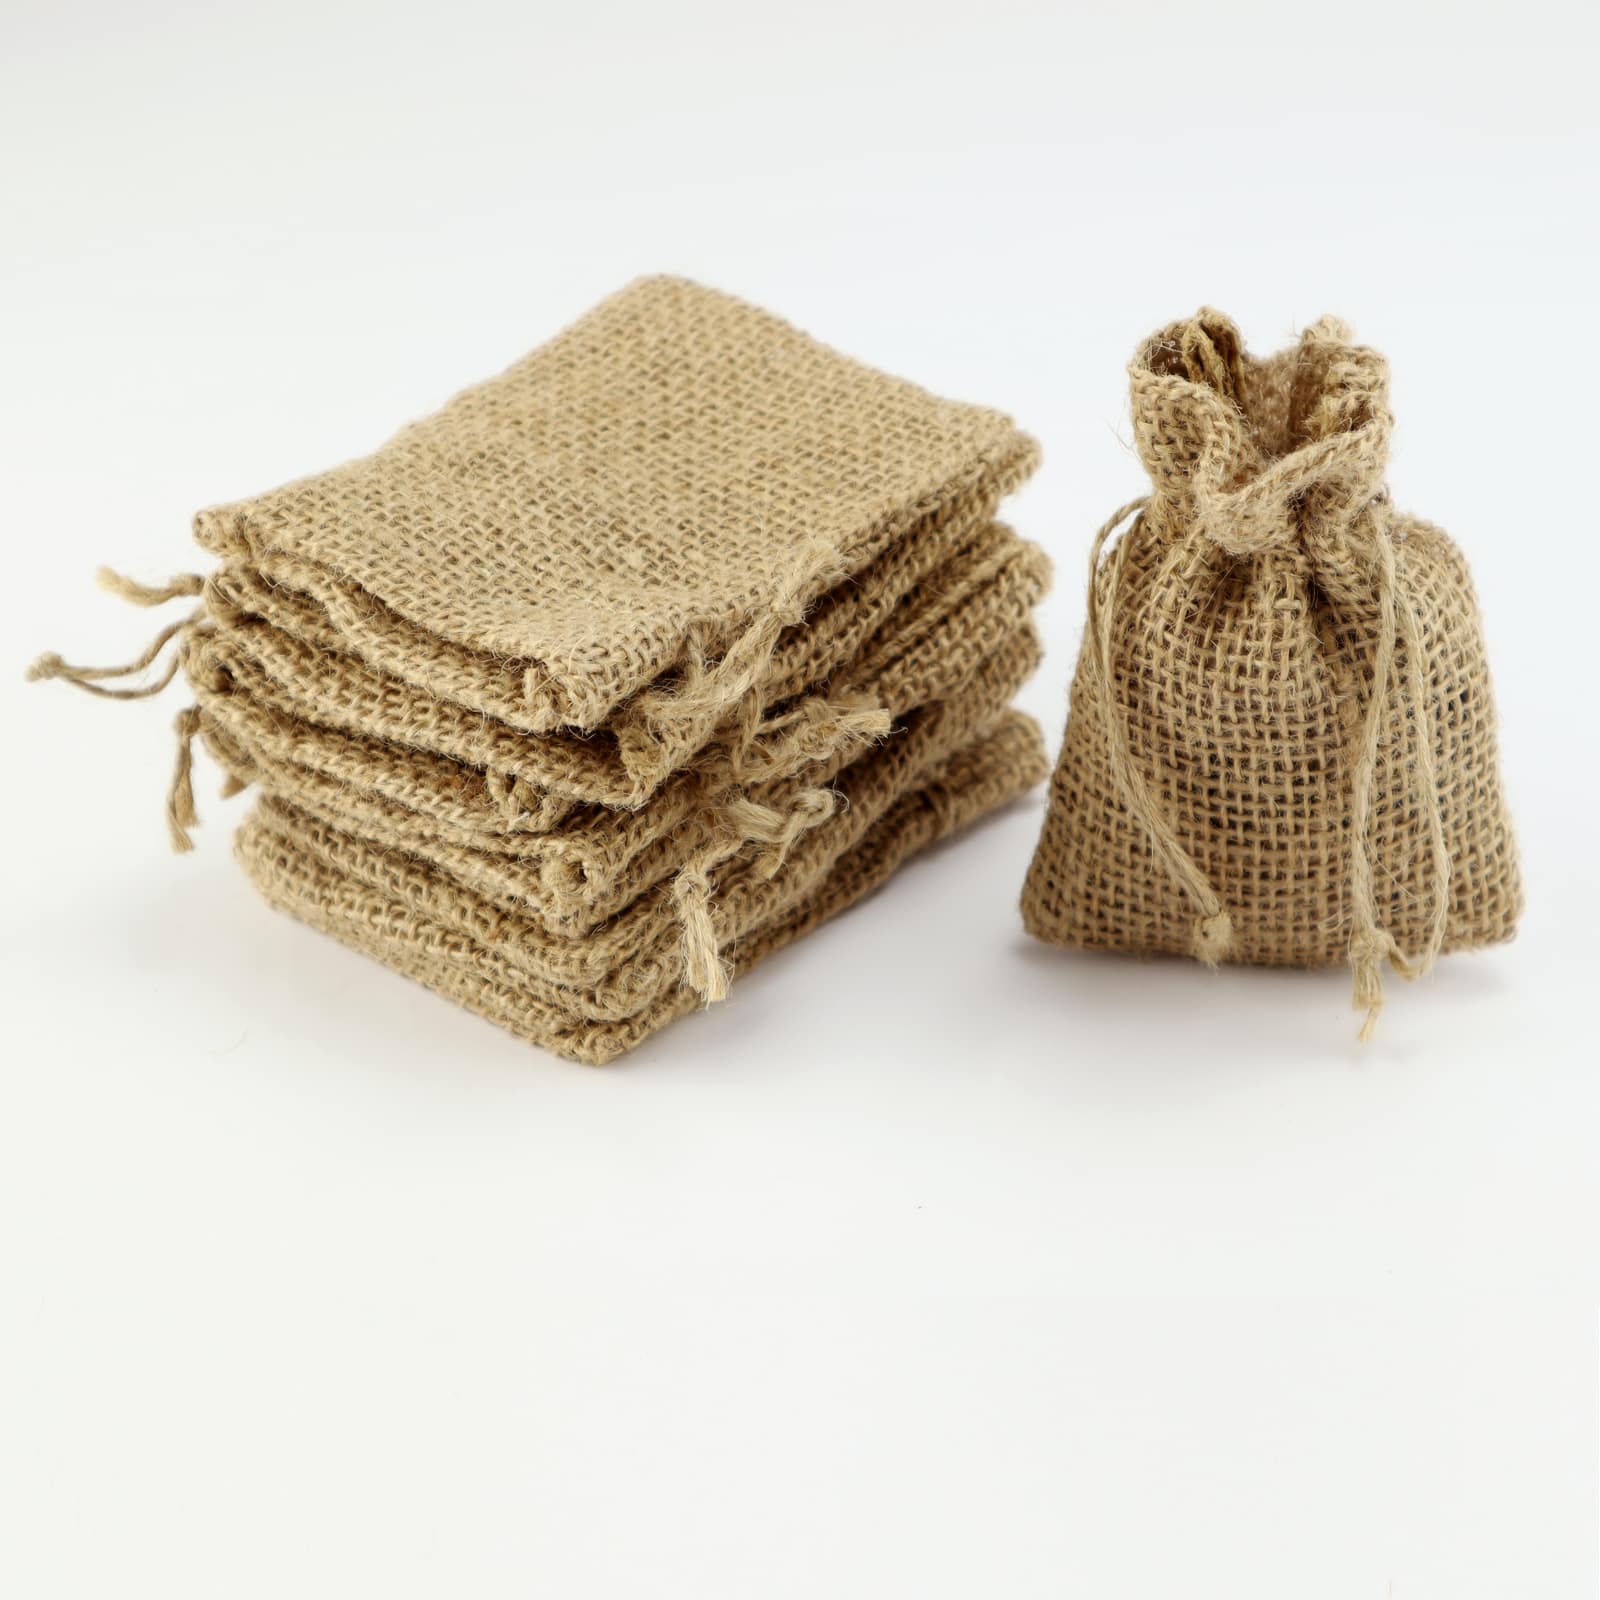 2 NEW JUTE  BURLAP SACKS WITH DRAWSTRINGS  3" BY 5" WEDDING PARTY FAVOR BAGS 